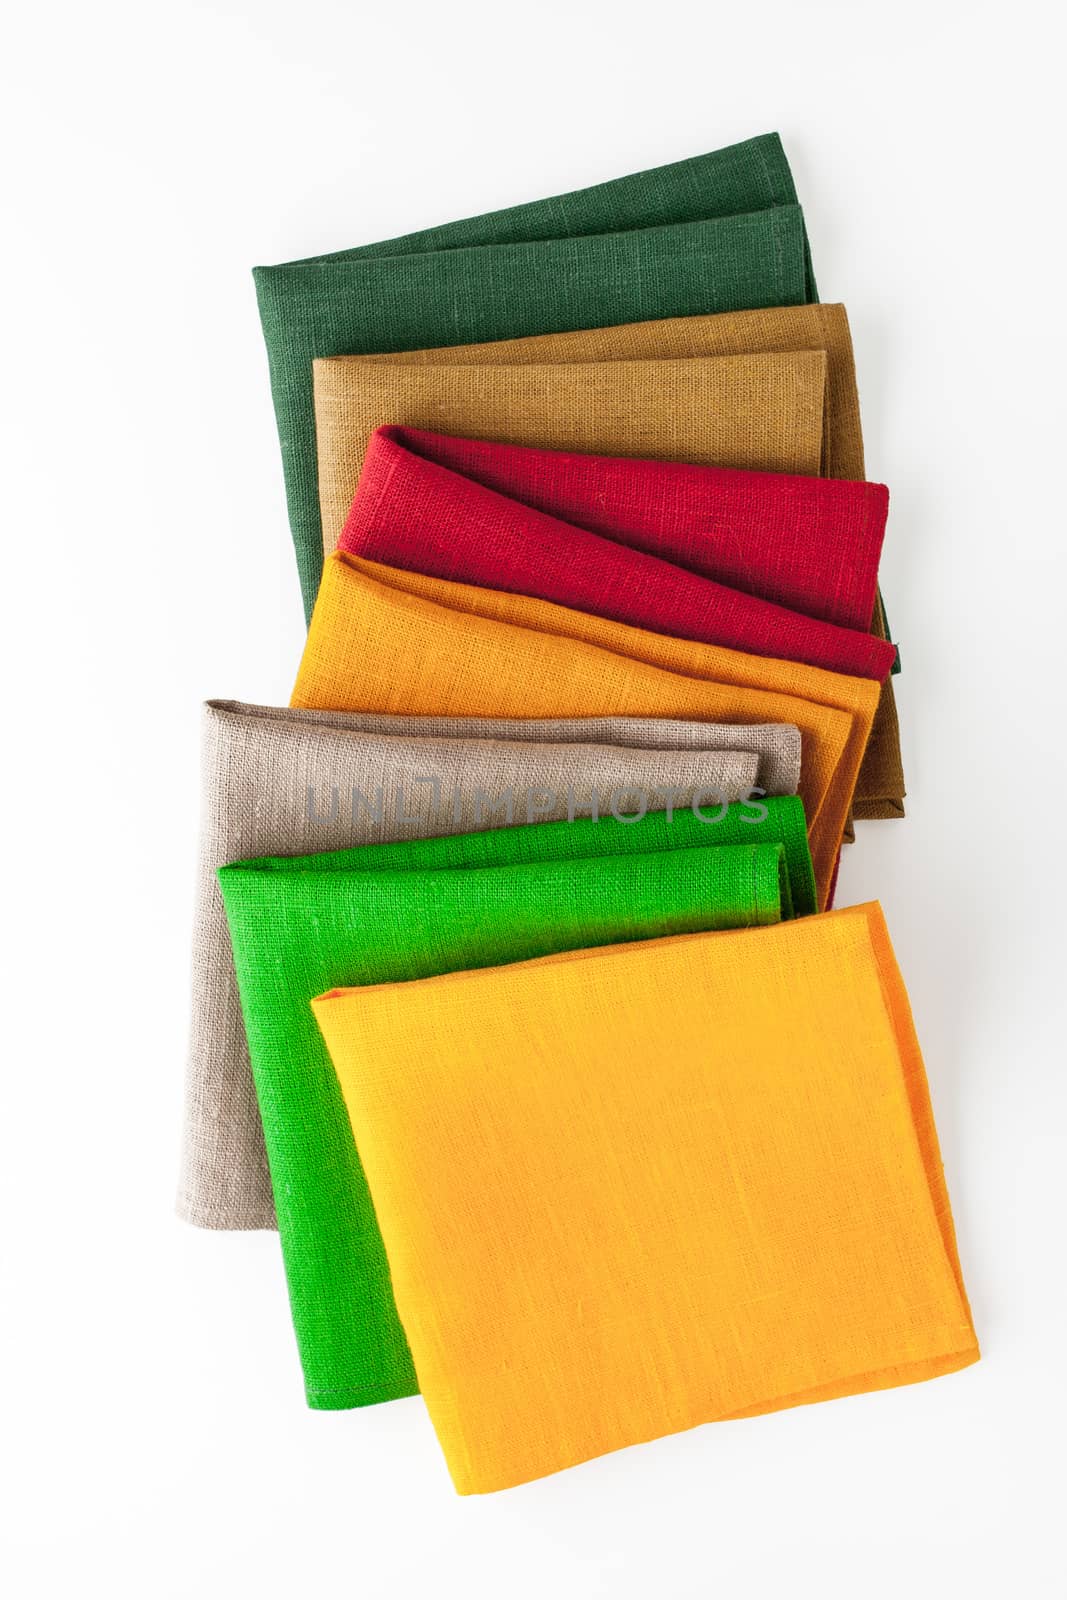 Colorful napkins  on the white background  vertical